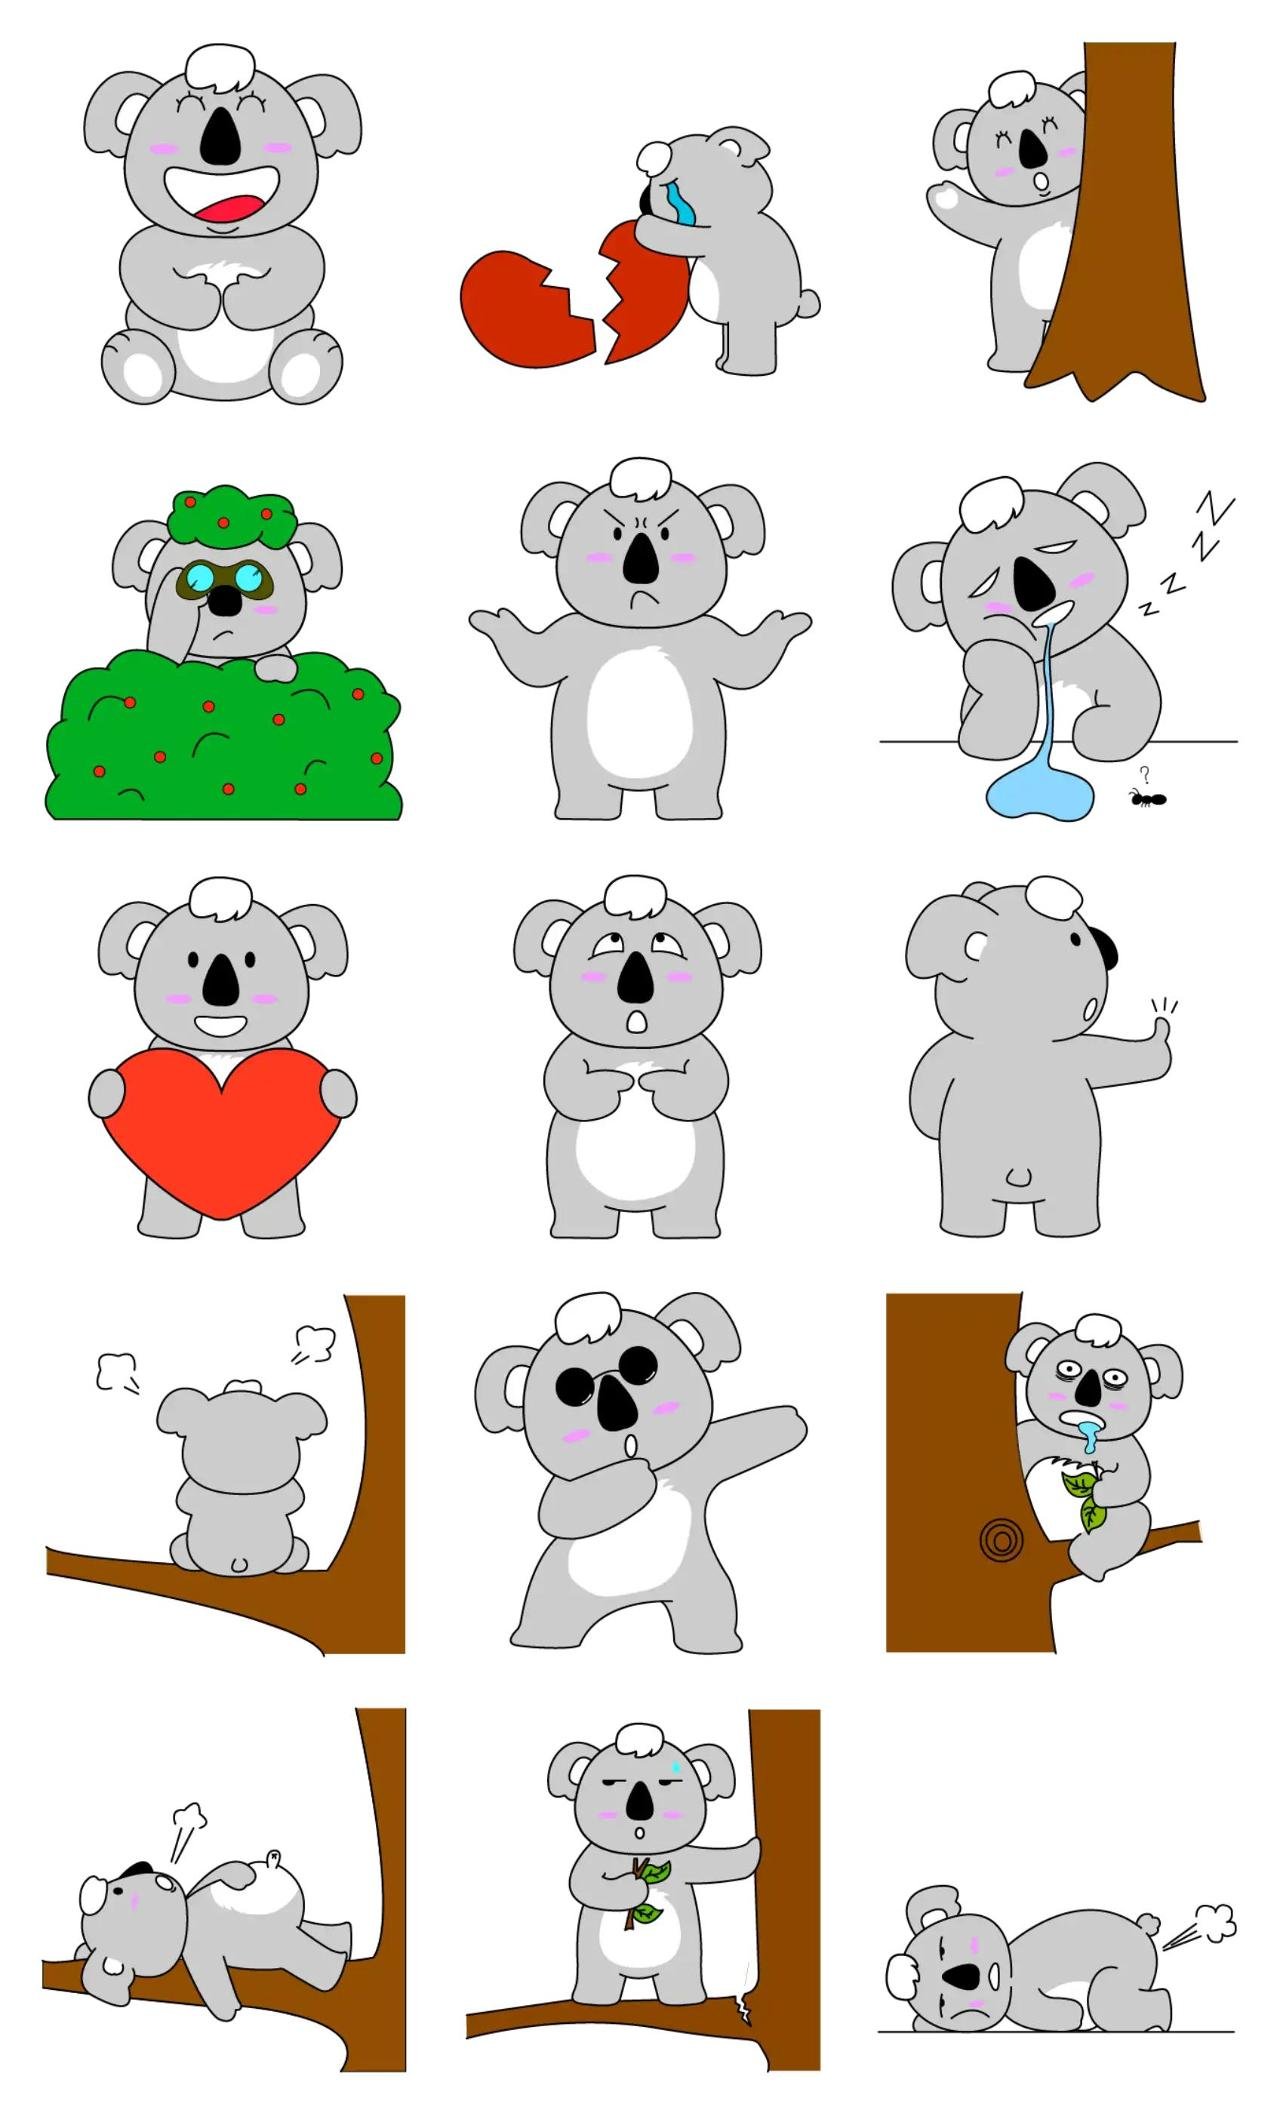 Lovely Koala Animals sticker pack for Whatsapp, Telegram, Signal, and others chatting and message apps